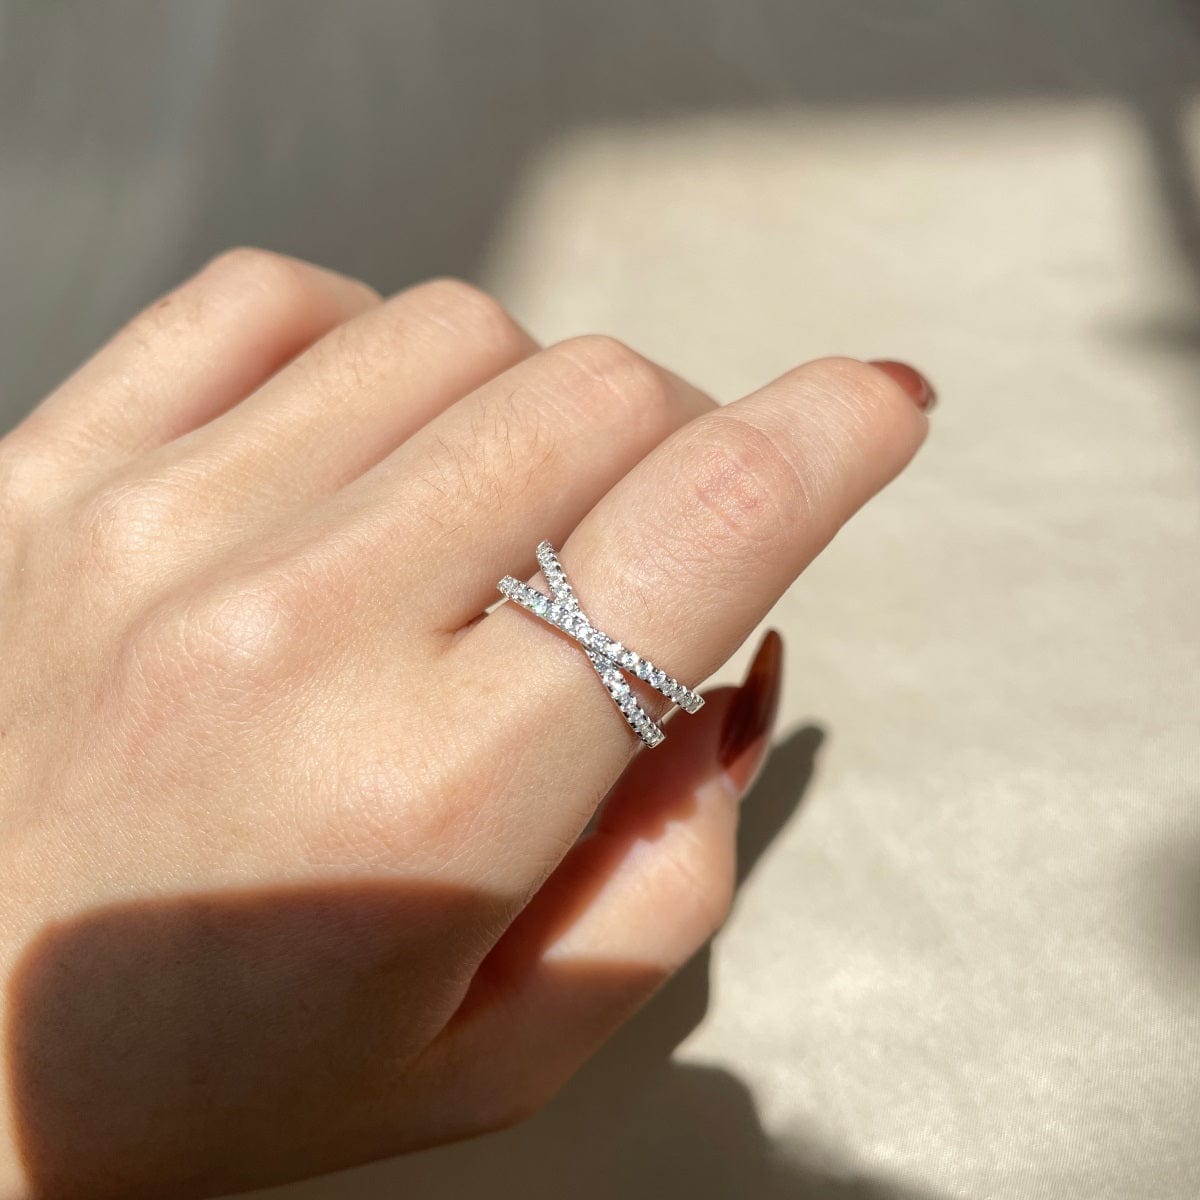 Criss Cross Engagement Rings, Unique Style | Simon G. Jewelry